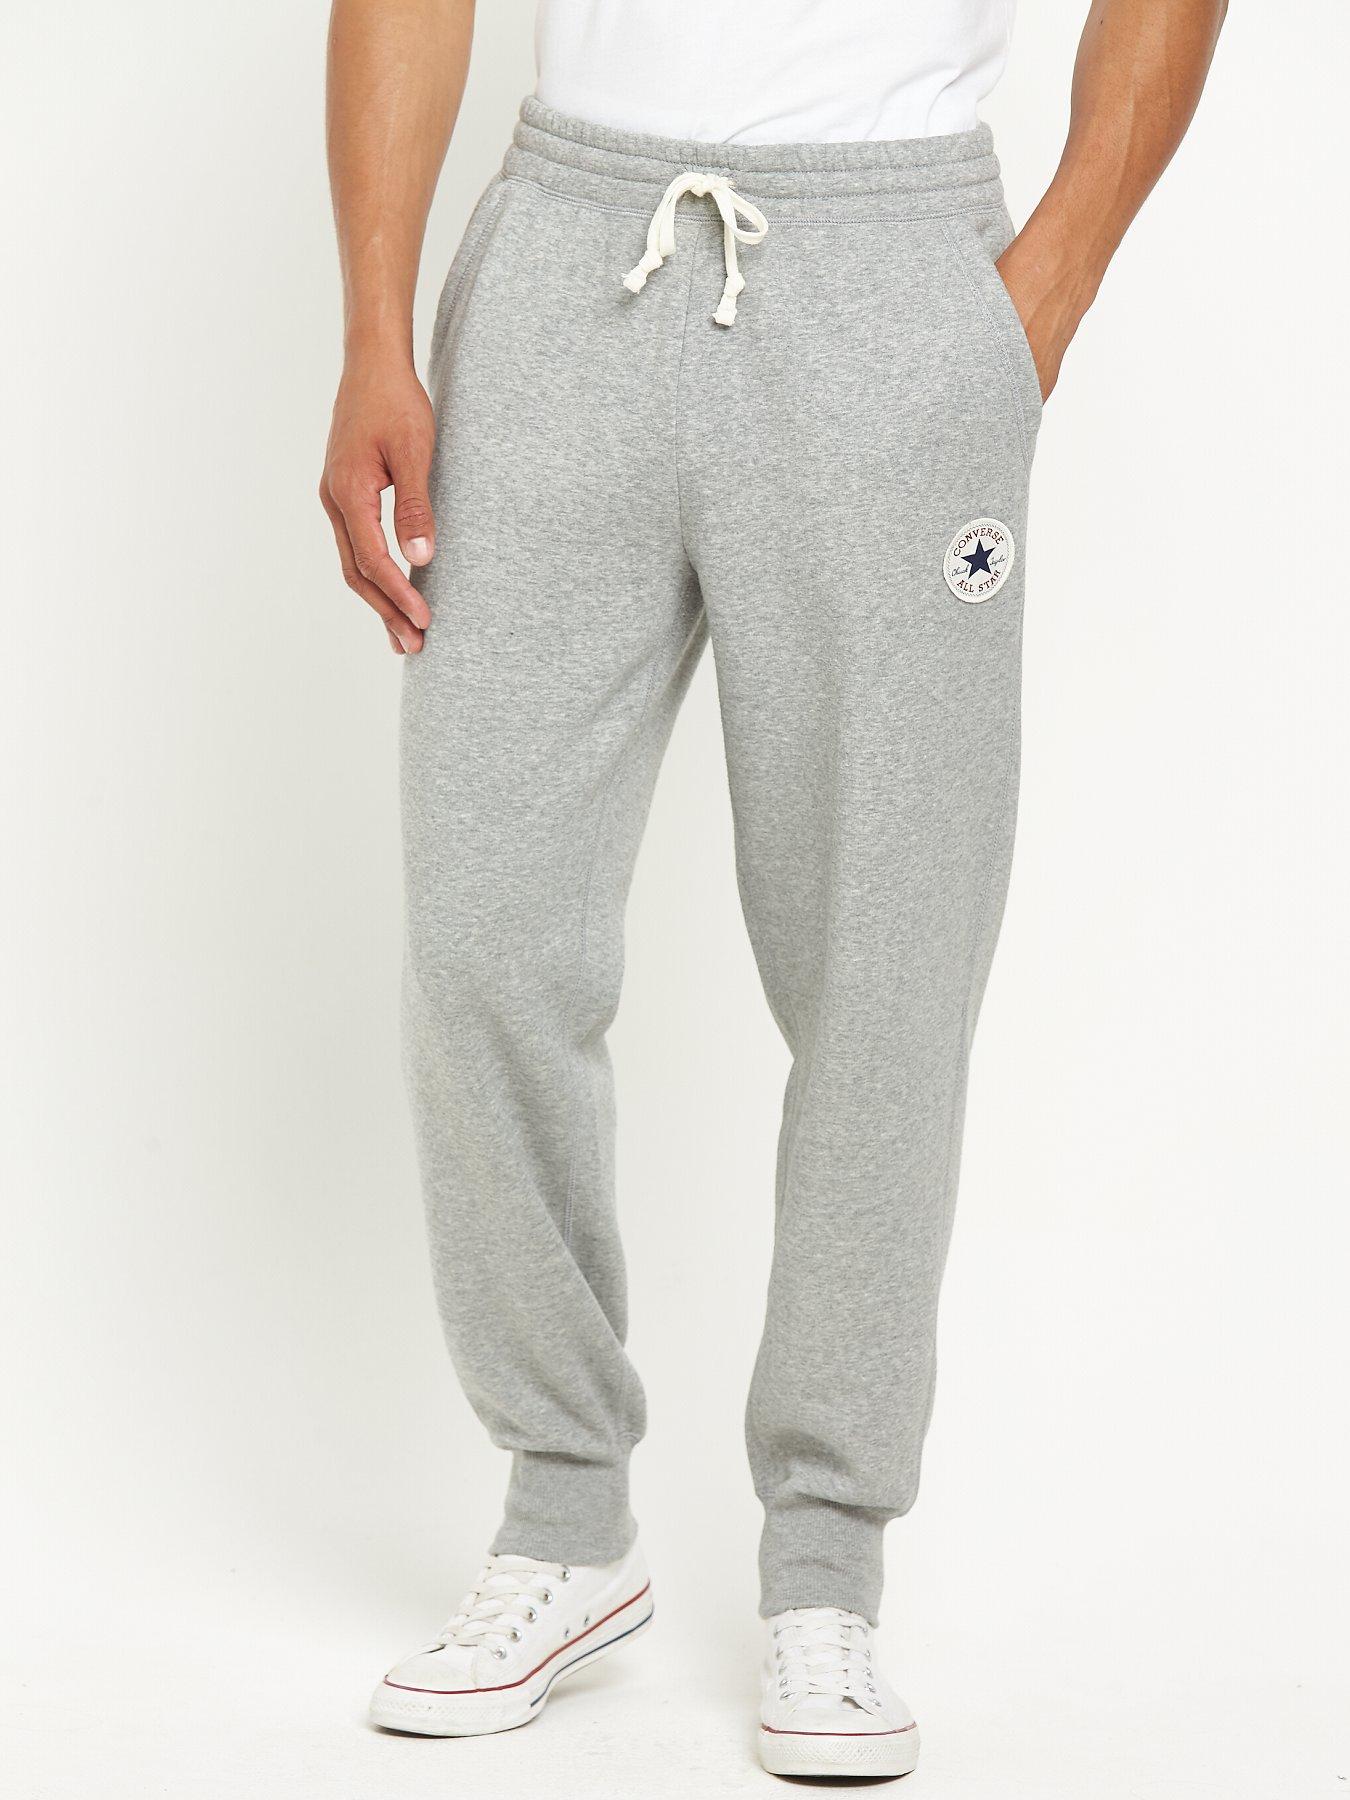 converse trousers mens